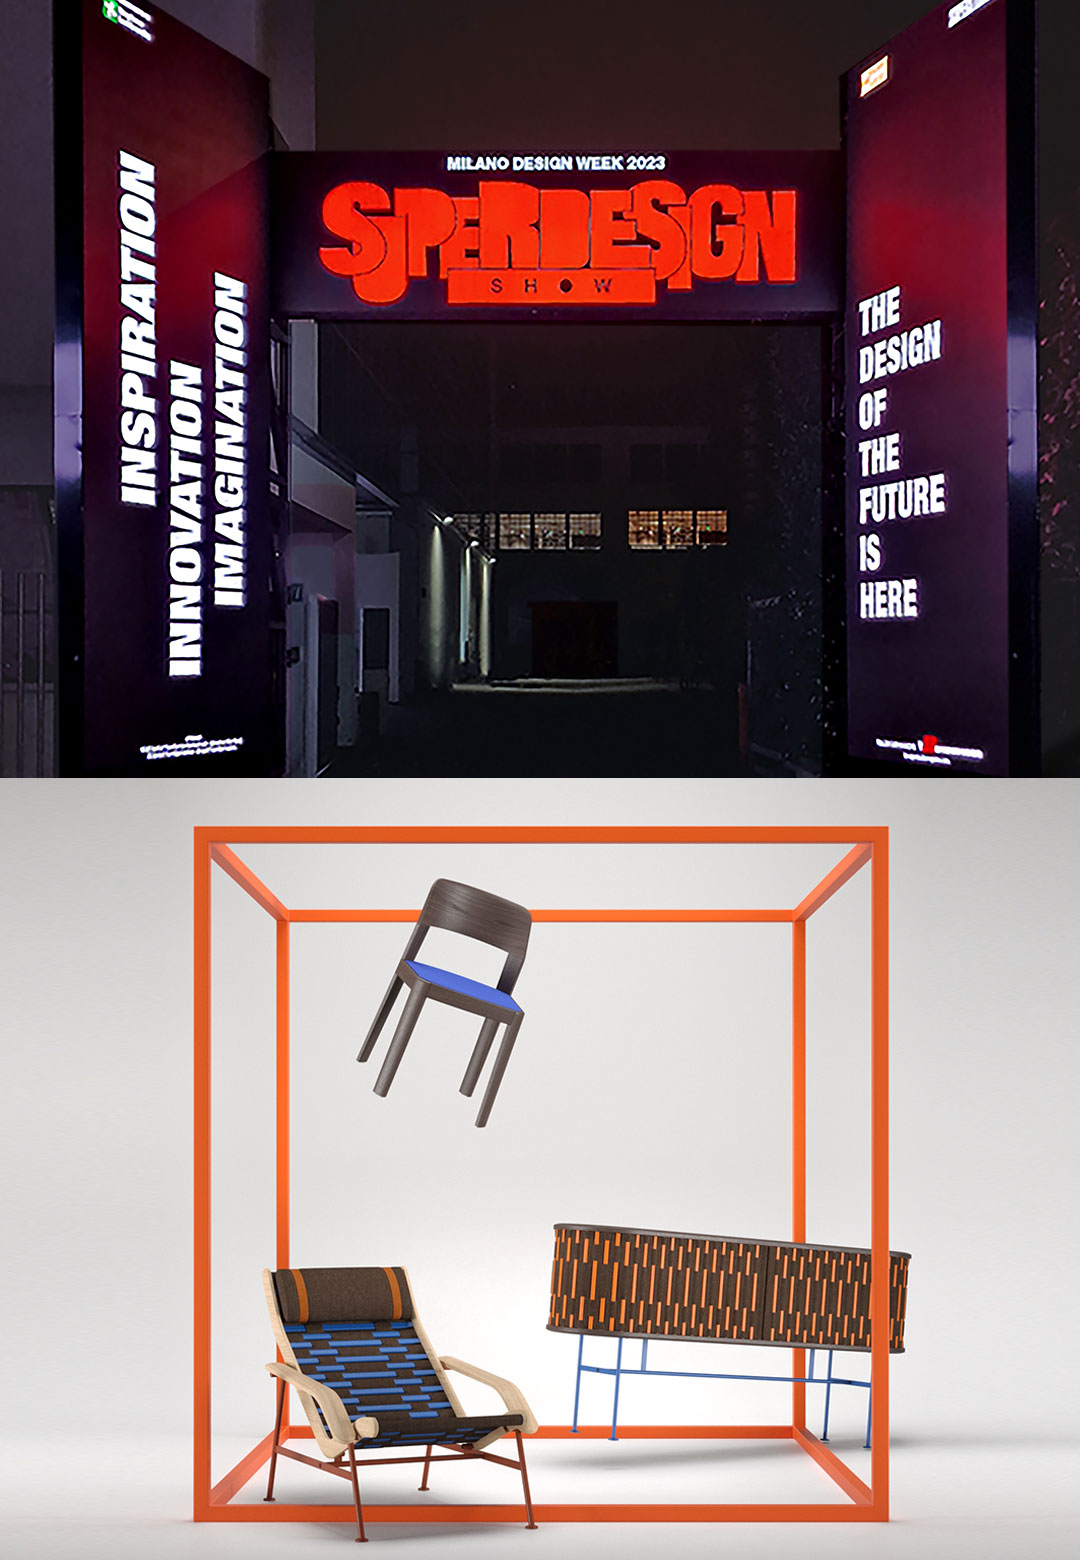 Superdesign Show 2023: a call for 'Inspiration, Innovation, Imagination' in Milan